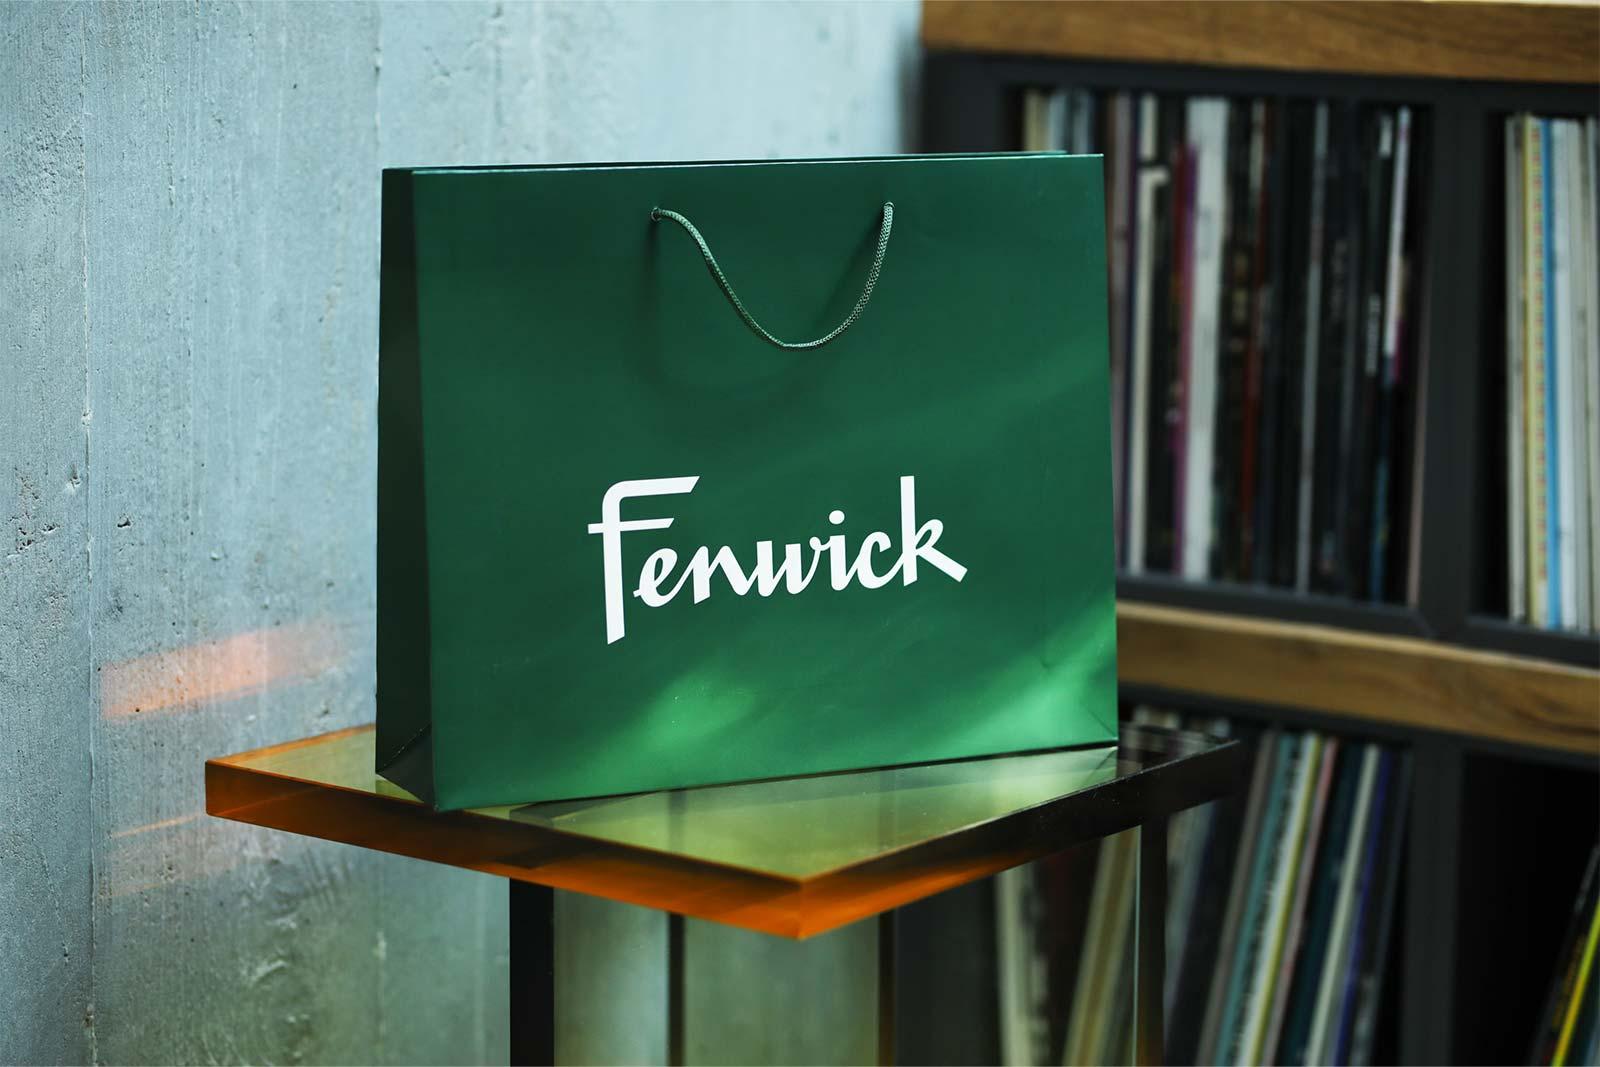 Image of a Fenwick carrier bag